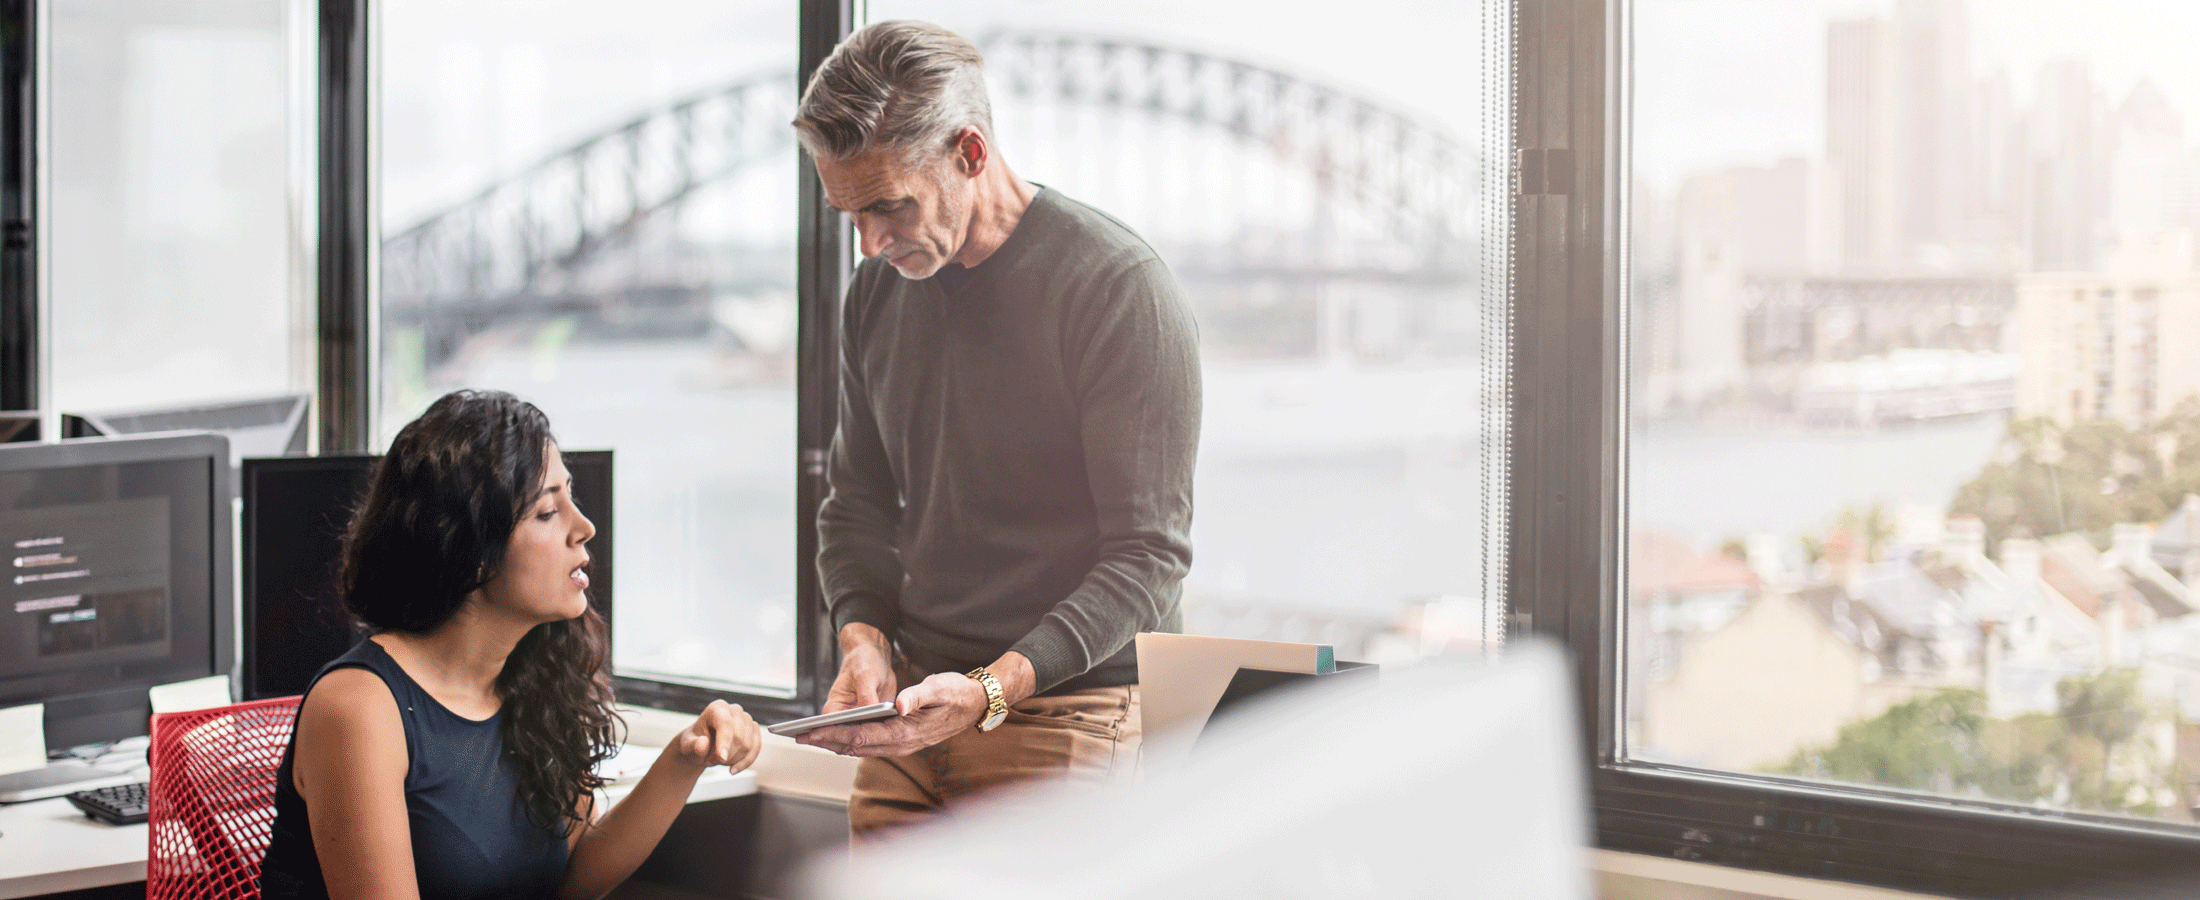 man and woman discussing in office with sydney harbour bridge in background